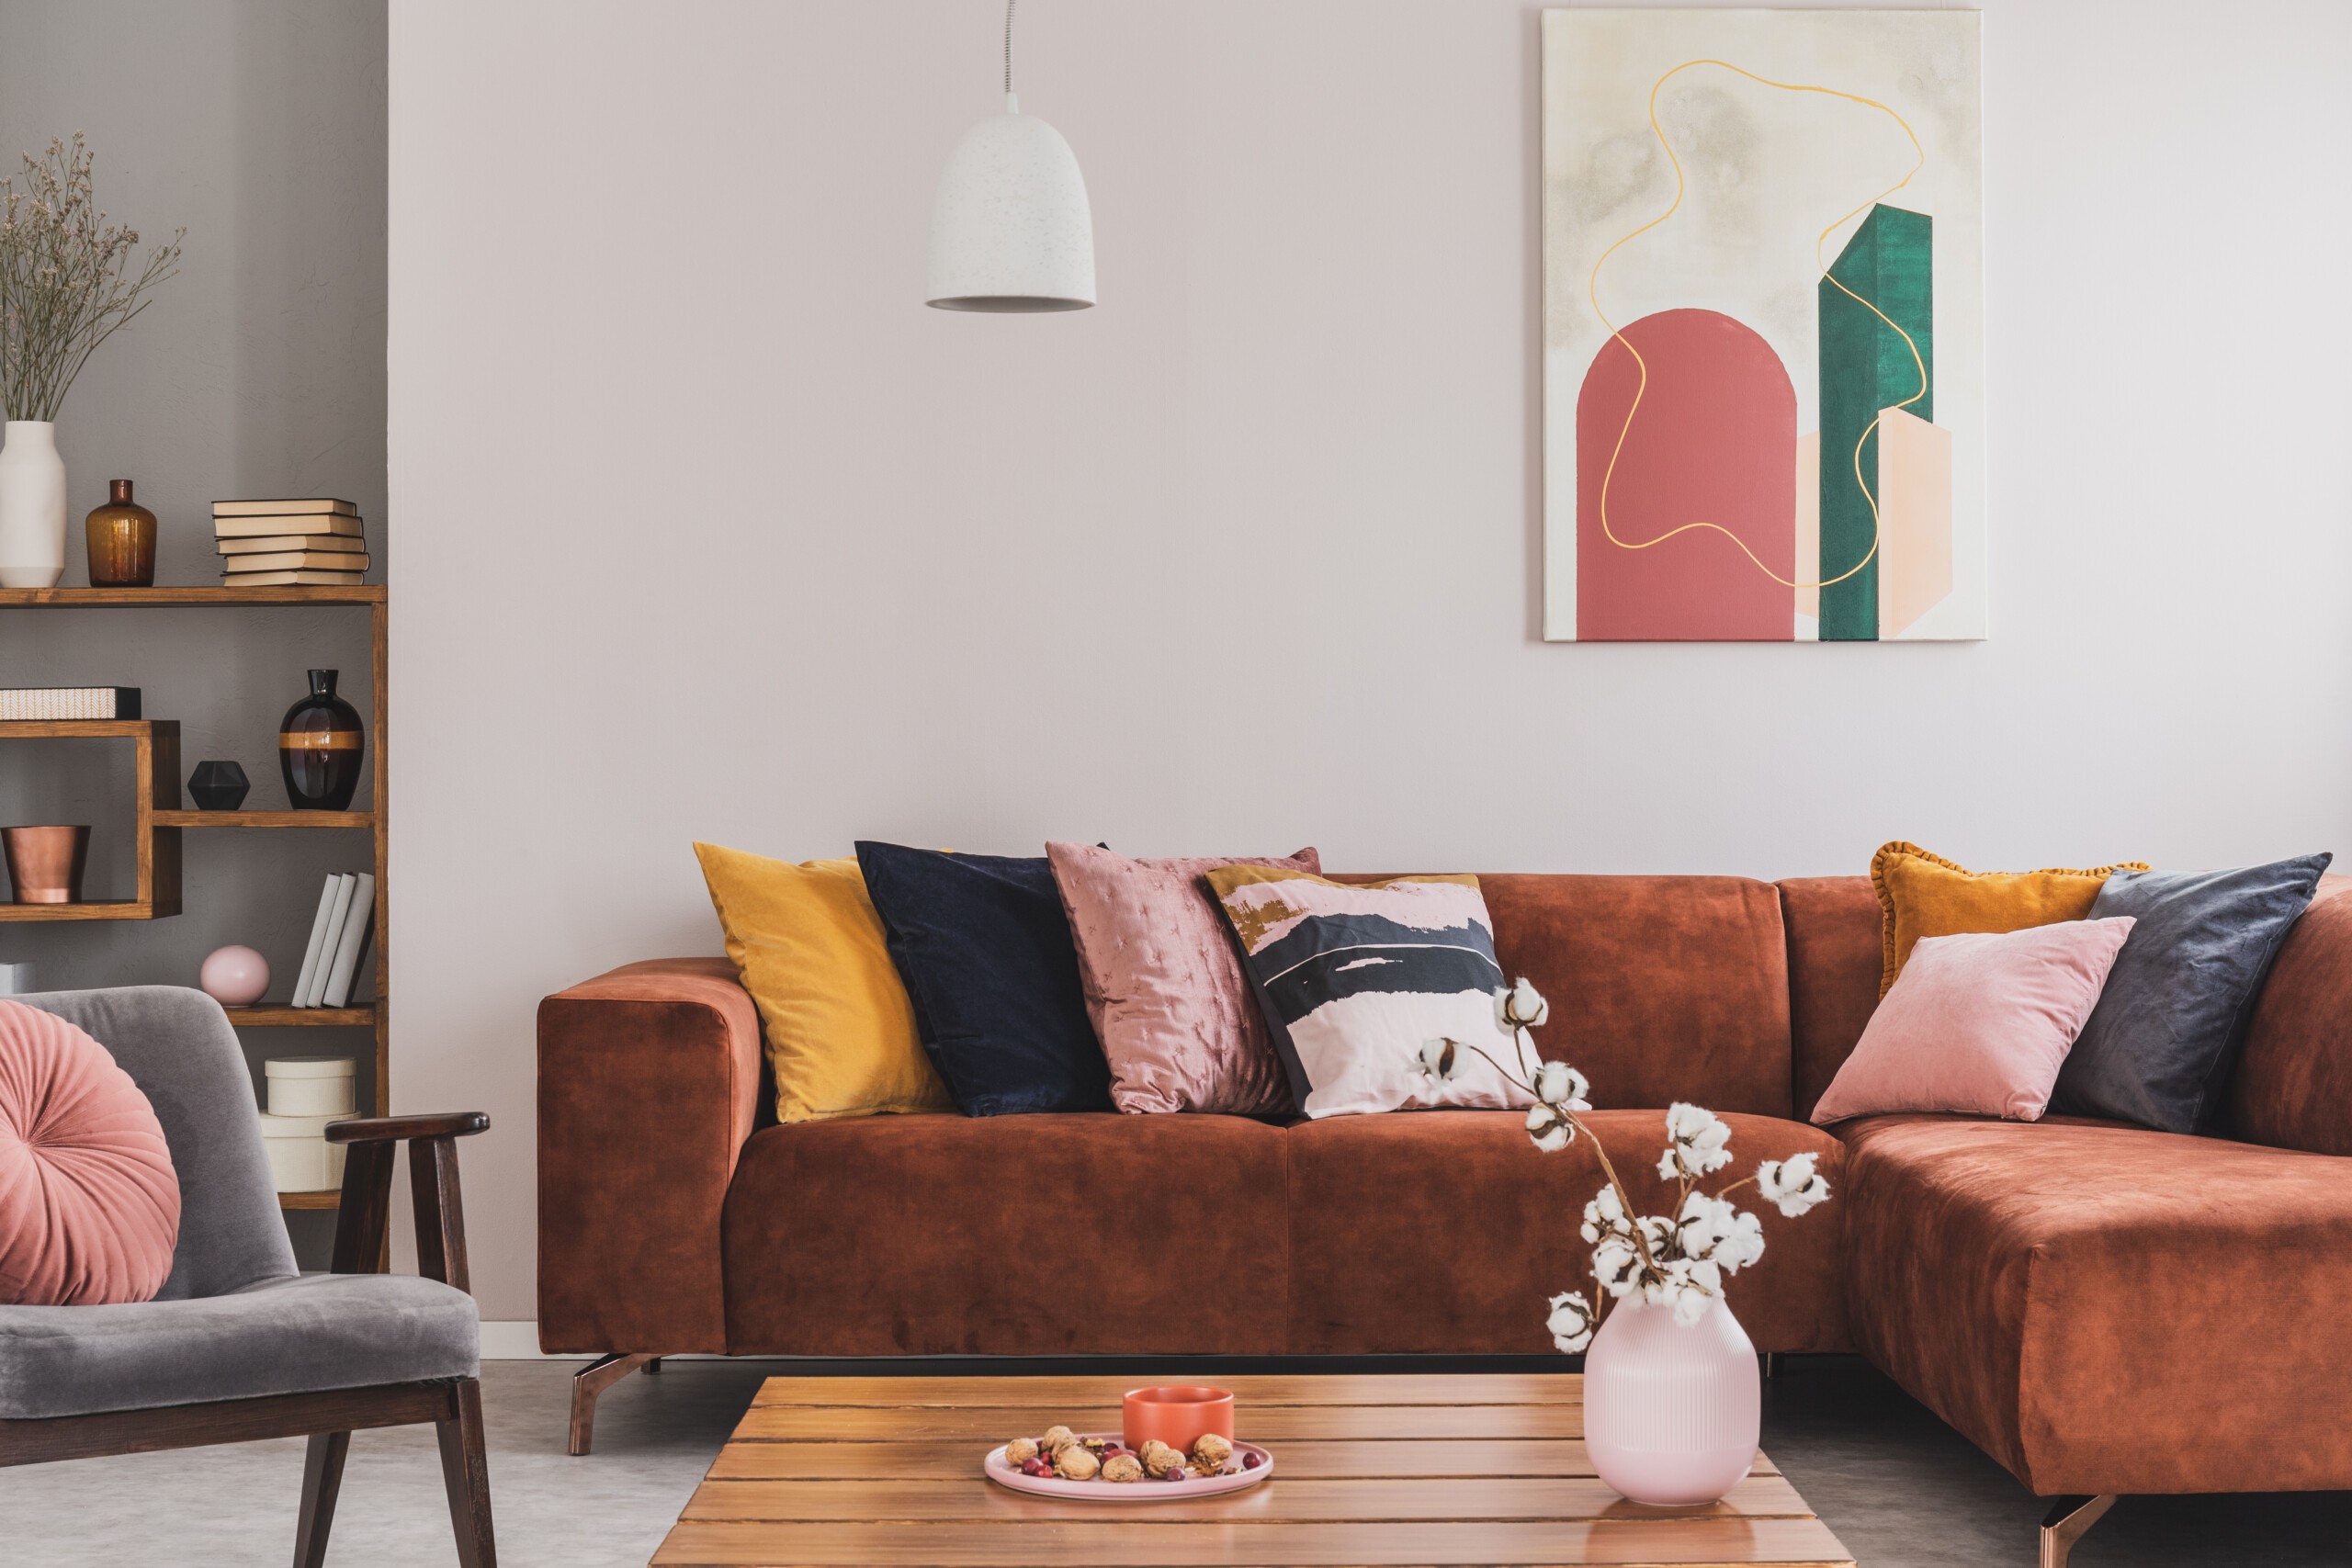 Living Room Paint Colors - The 14 Best Paint Trends To Try - Décor Aid